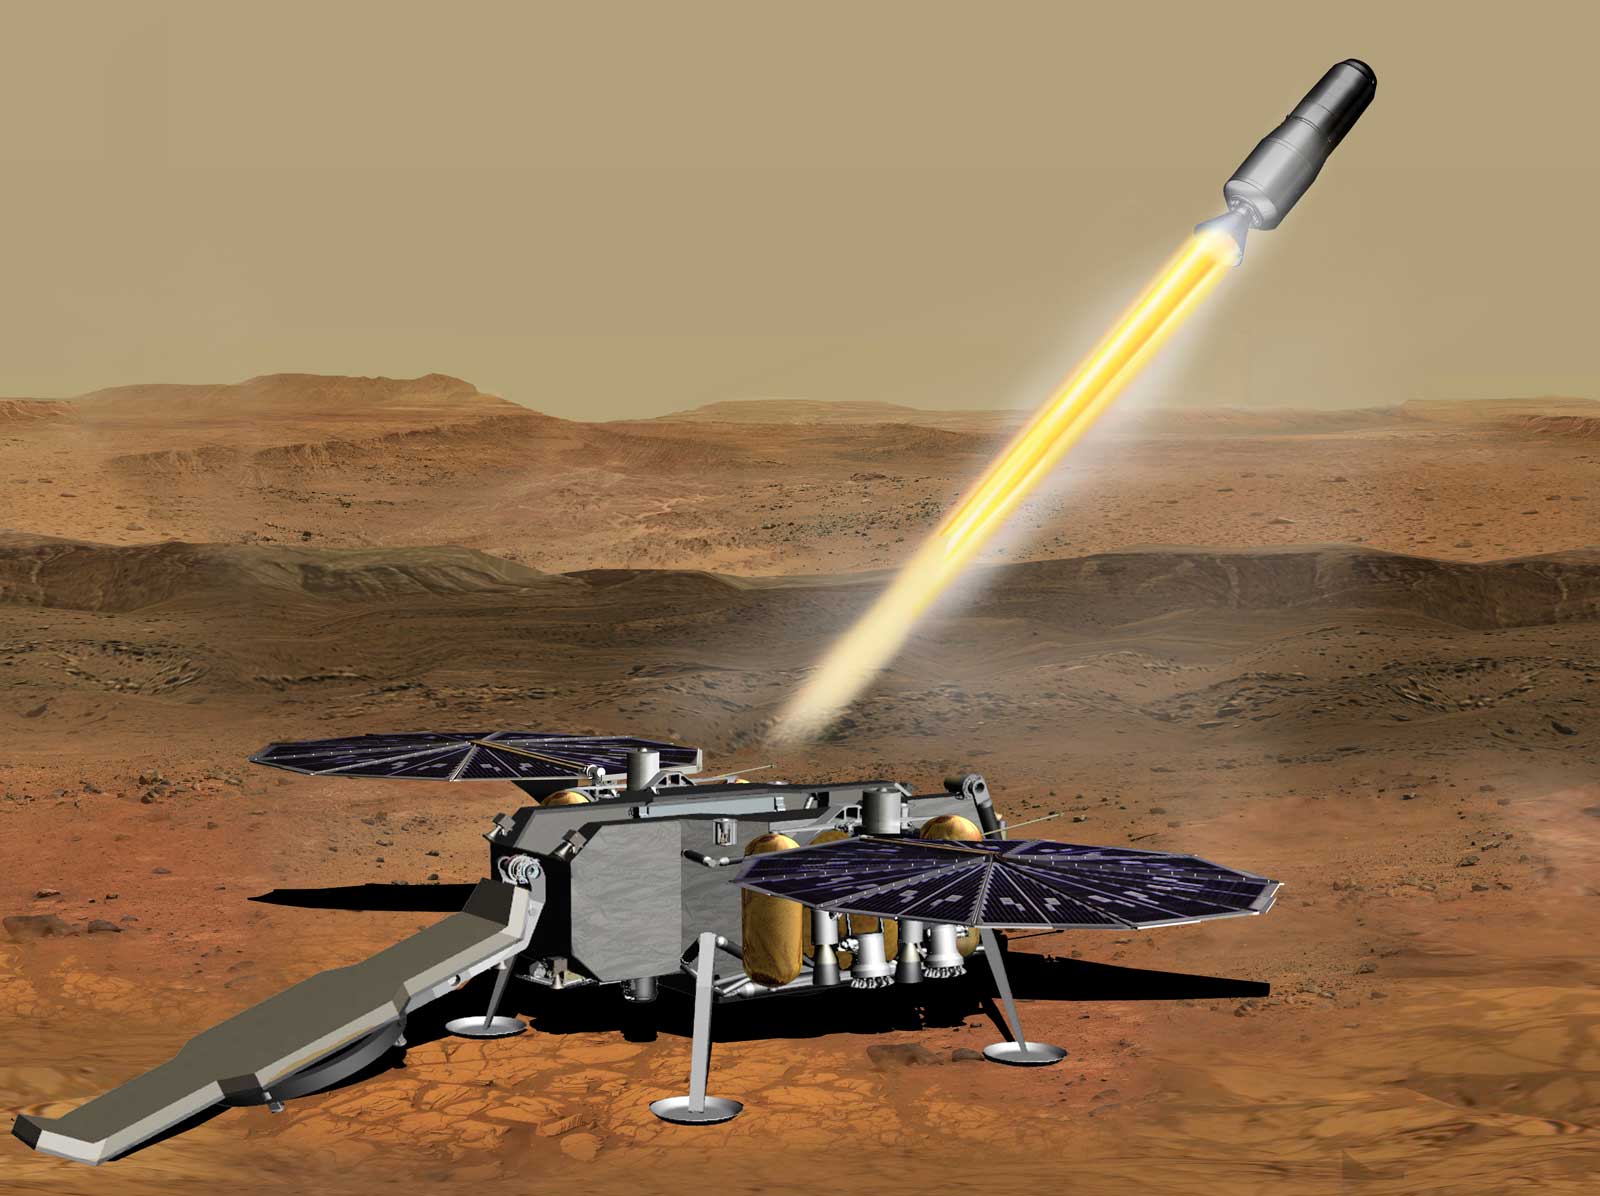 An illustration of a concept of how the NASA Mars Ascent Vehicle could be launched from the surface of Mars.